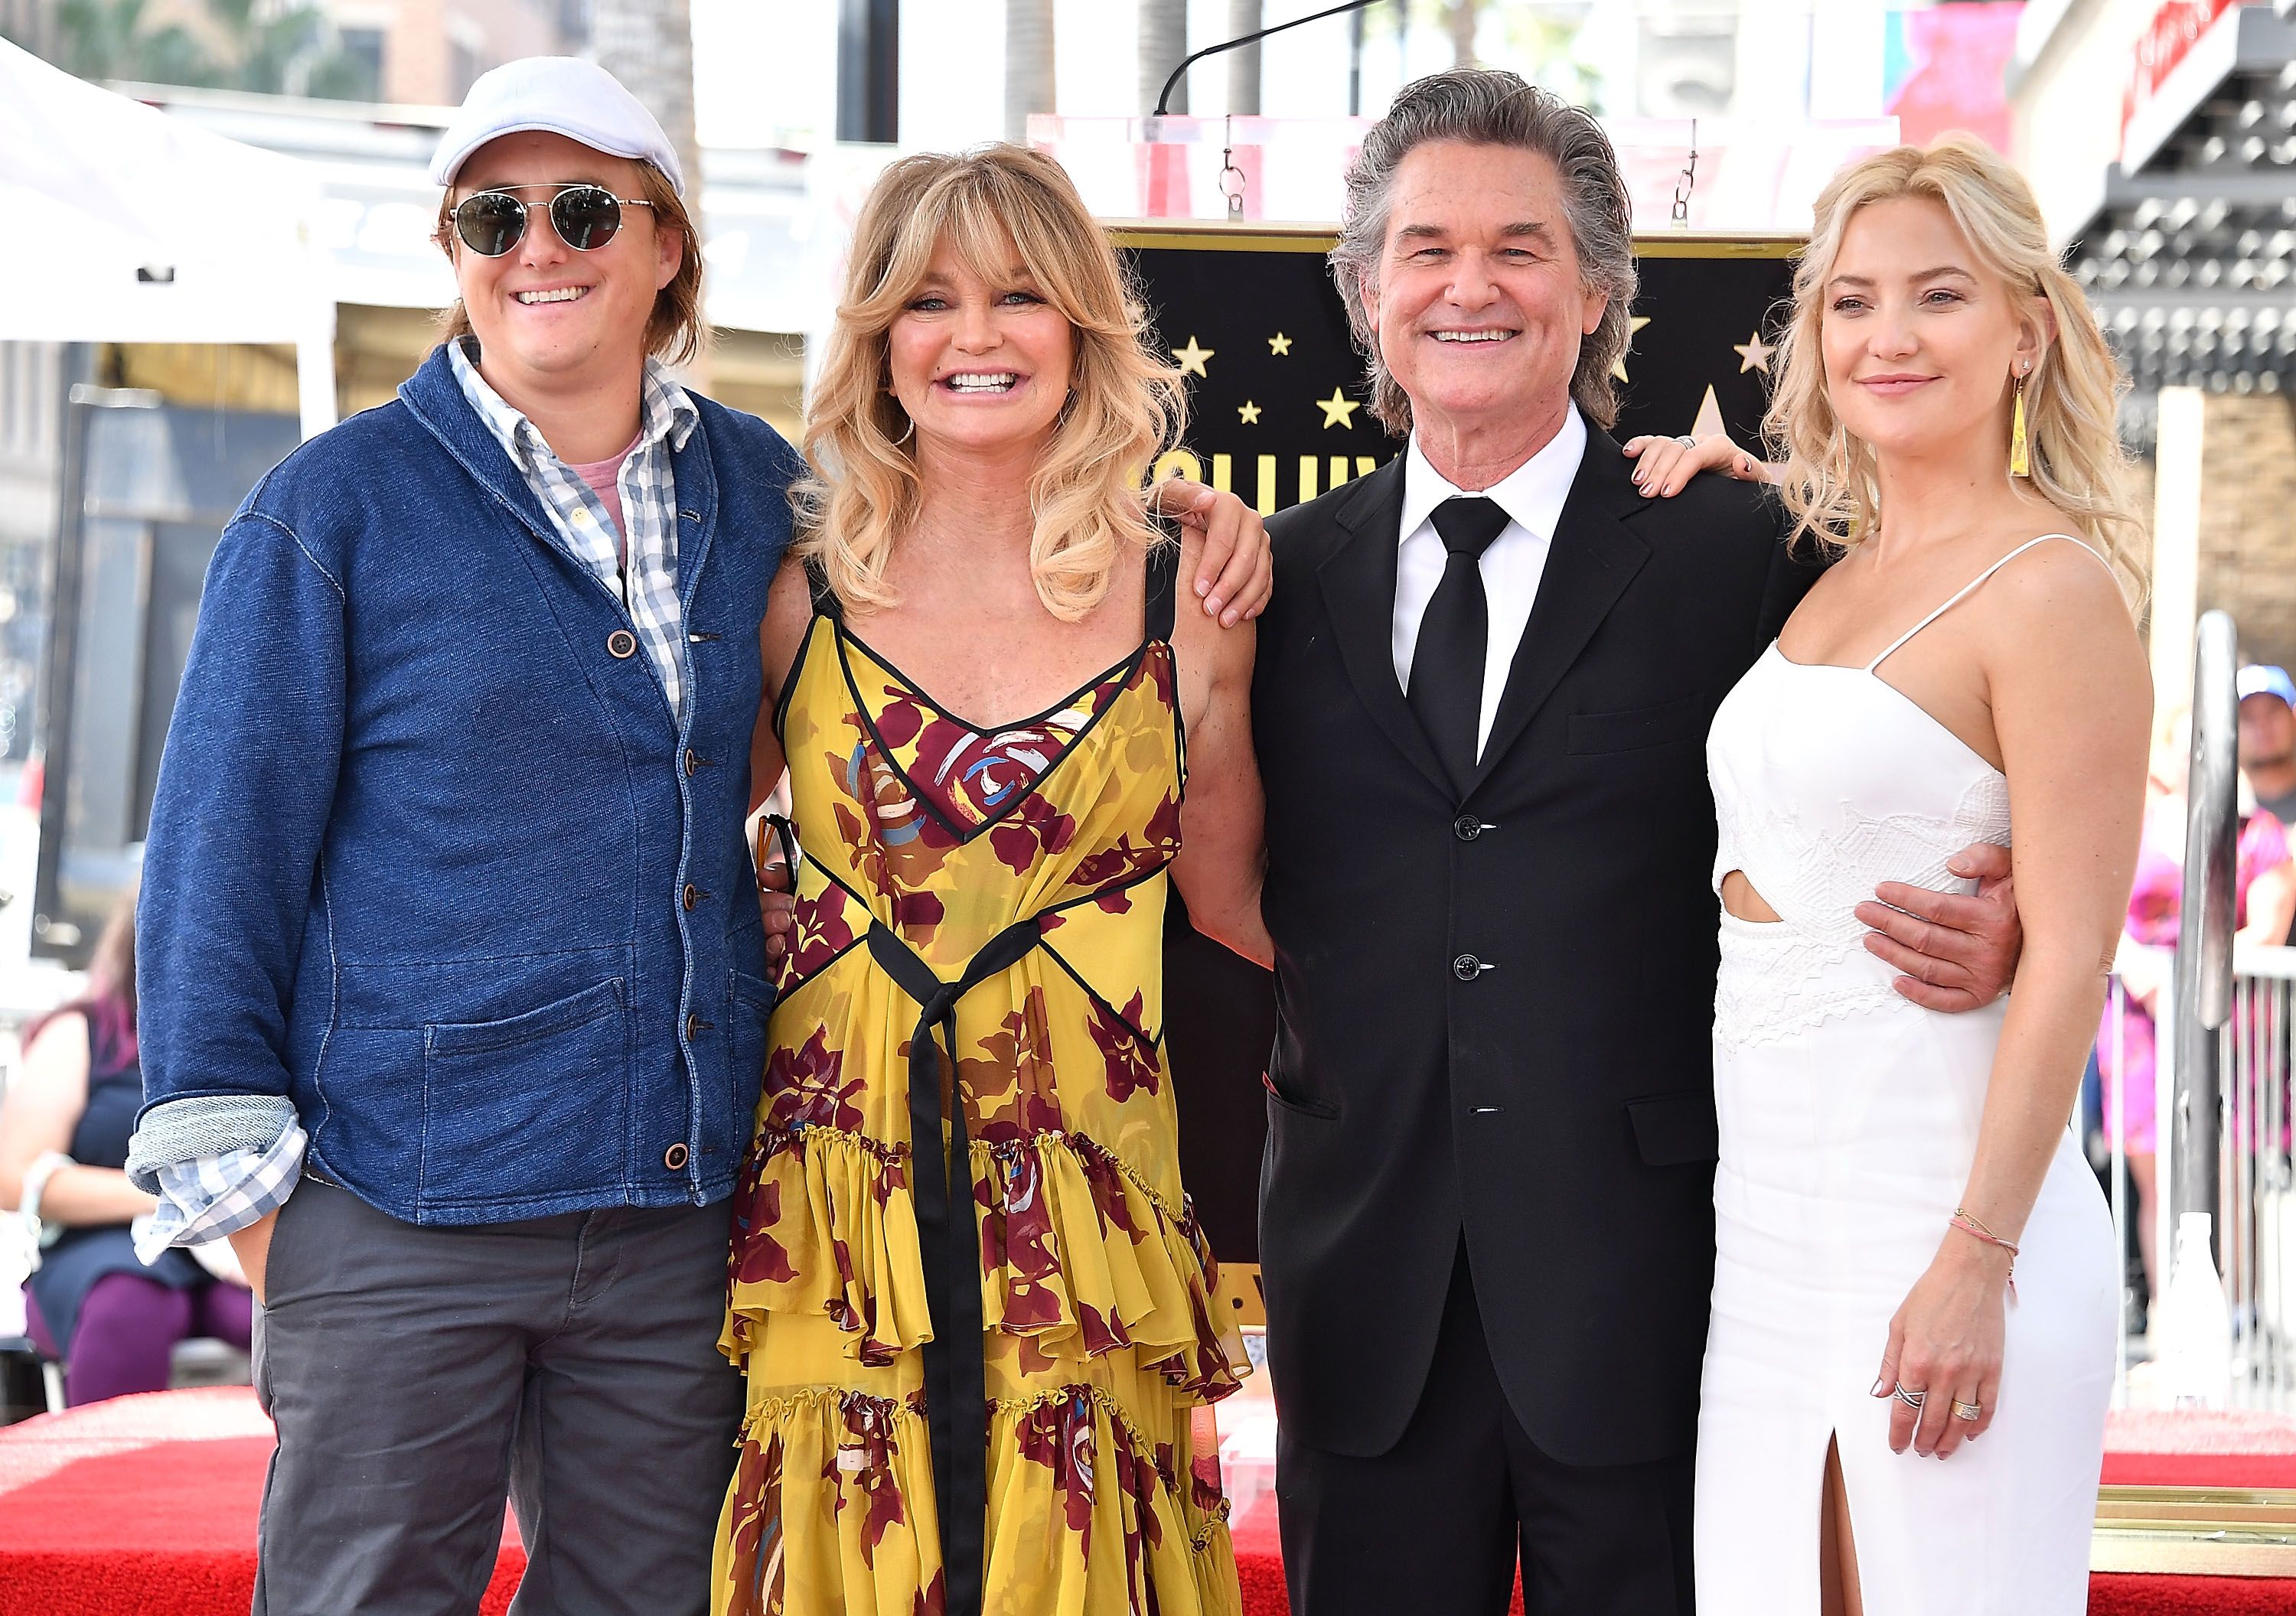 Boston Russell, Goldie Hawn, Kurt Russell and Kate Hudson during the Double Star Ceremony On The Hollywood Walk Of Fame on May 4, 2017 in Hollywood, California | Source: Getty Images